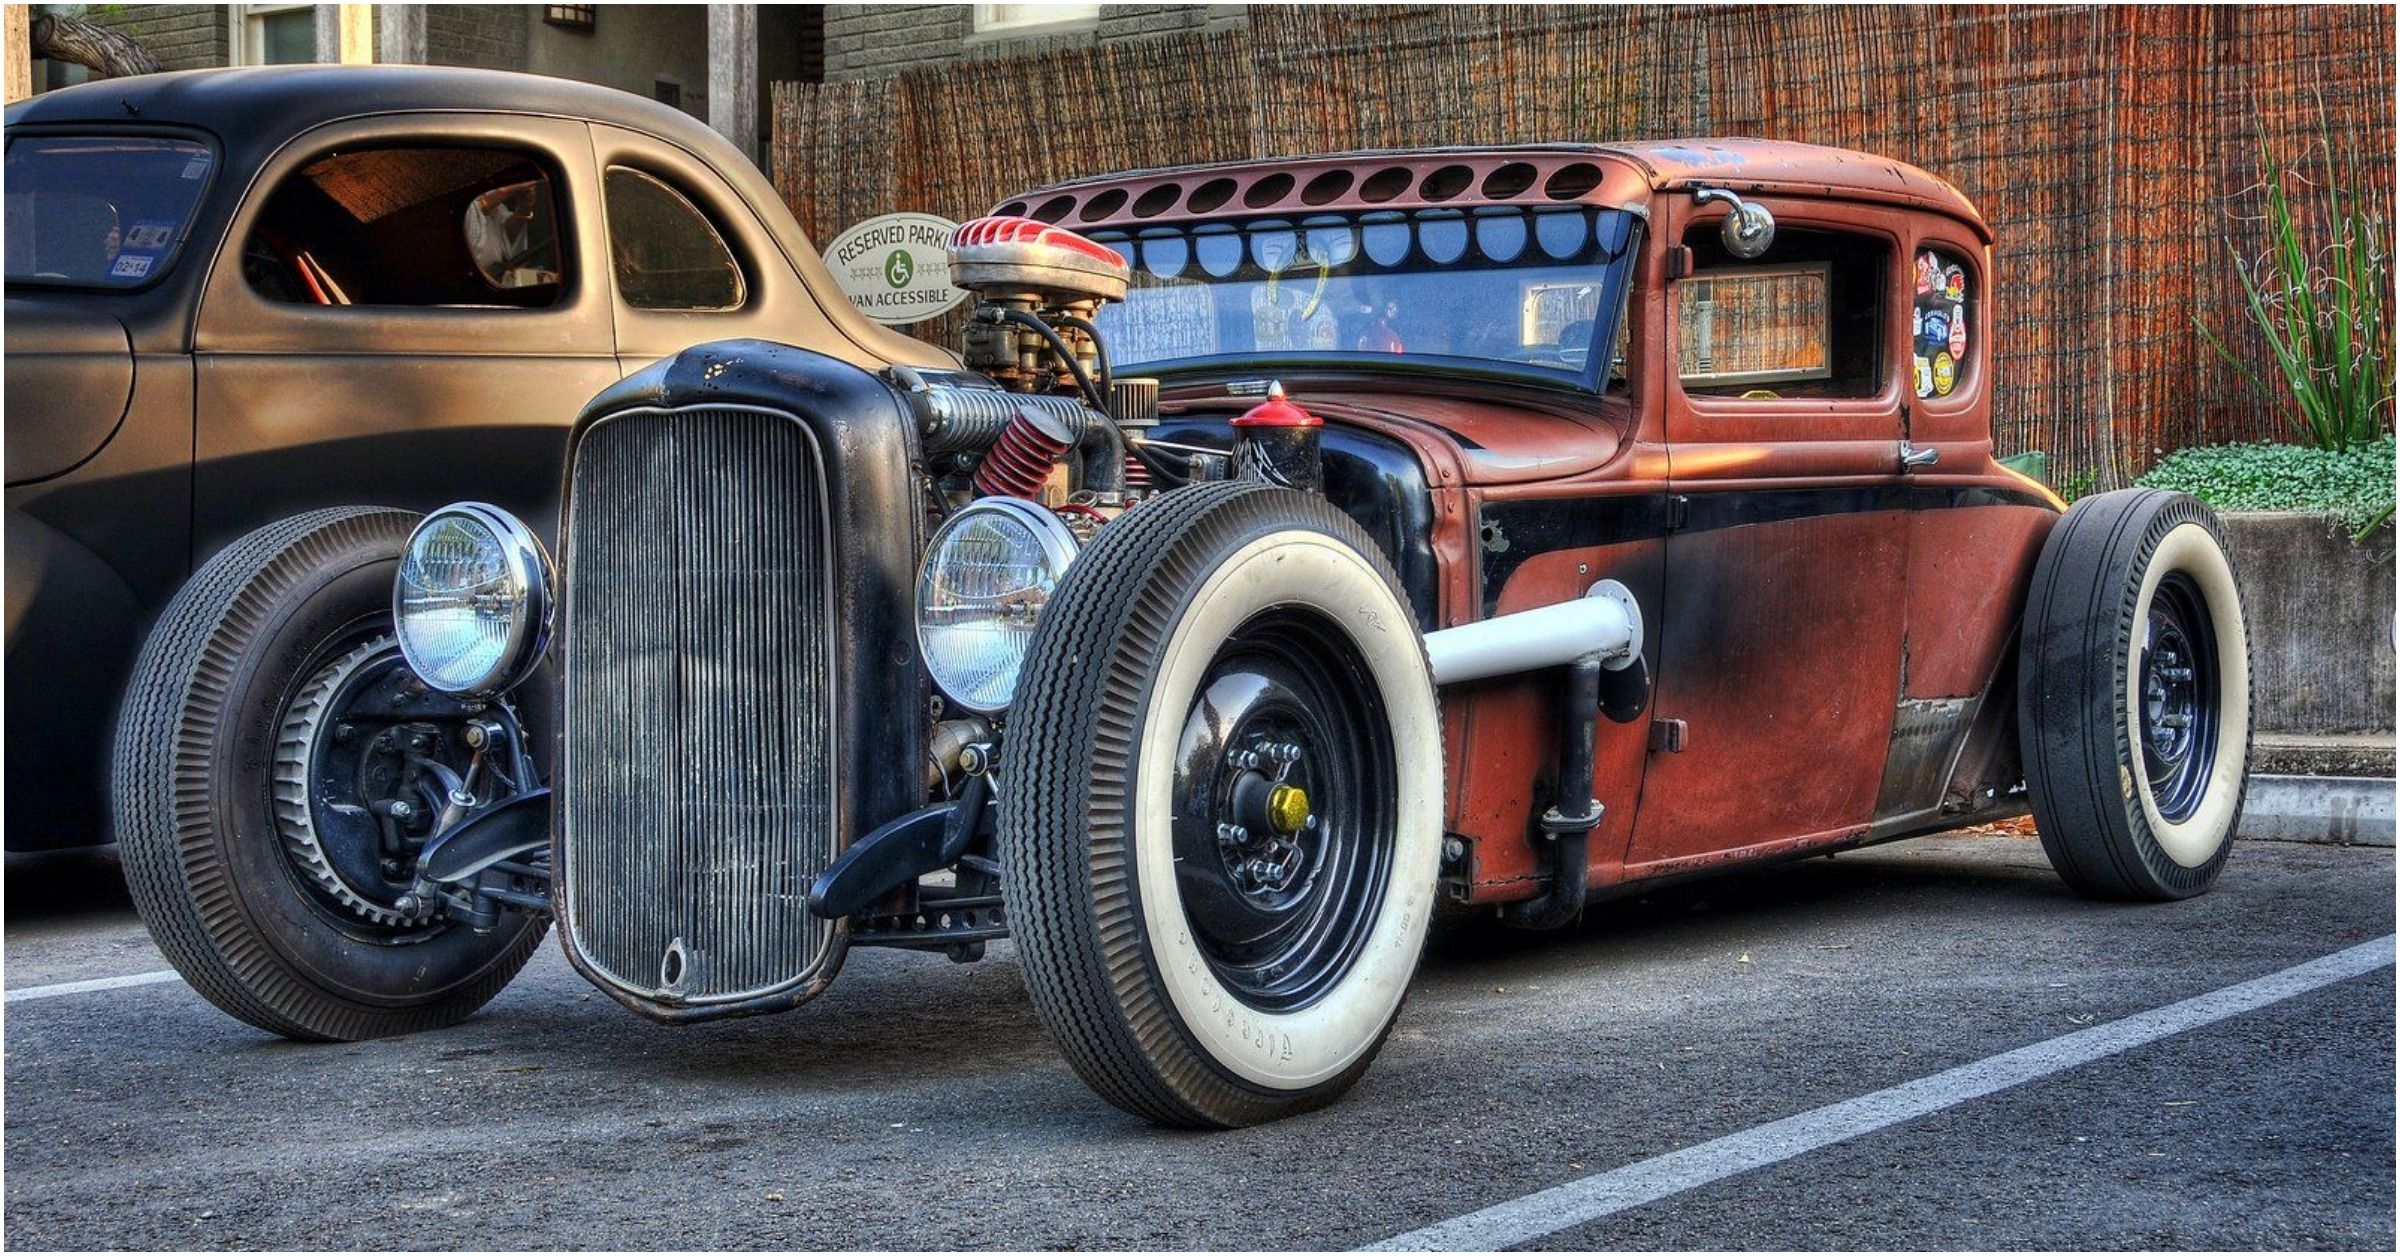 Img Rxx Mod Rat Rod Hot Rod Trucks Hot Rods Cars Muscle Hot Sex Picture